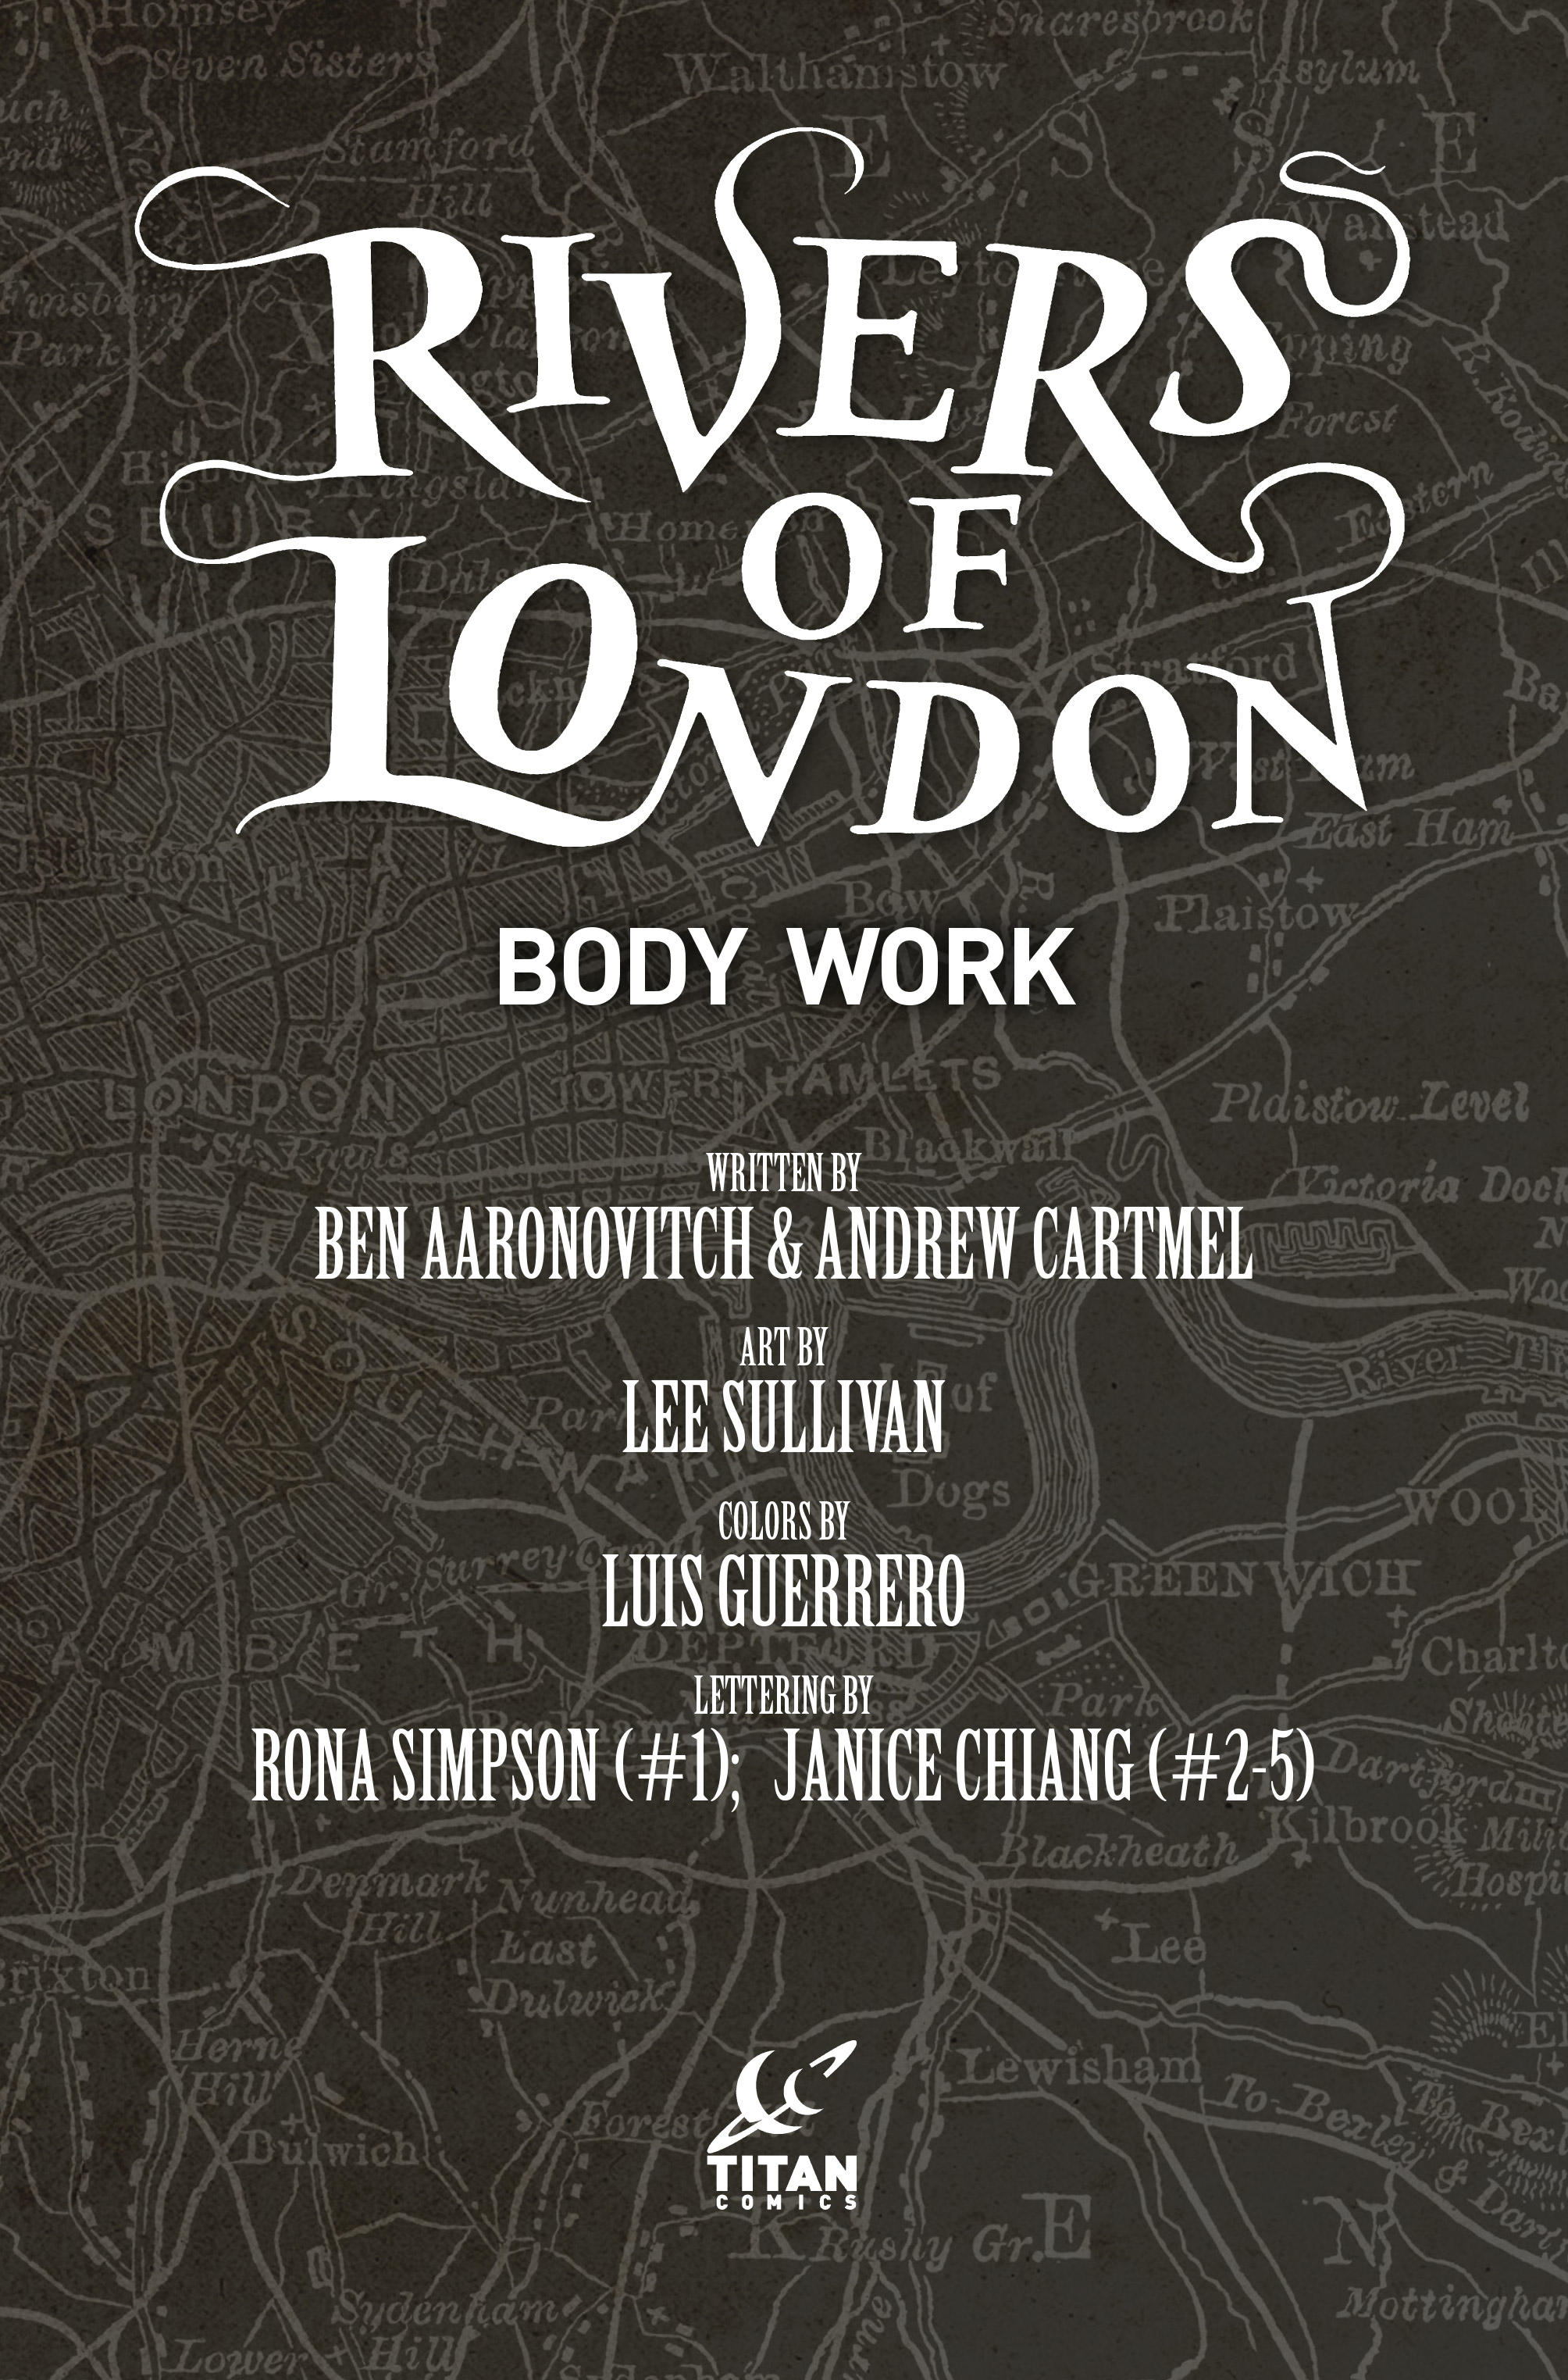 Read online Rivers of London: Body Work comic -  Issue # TPB - 4